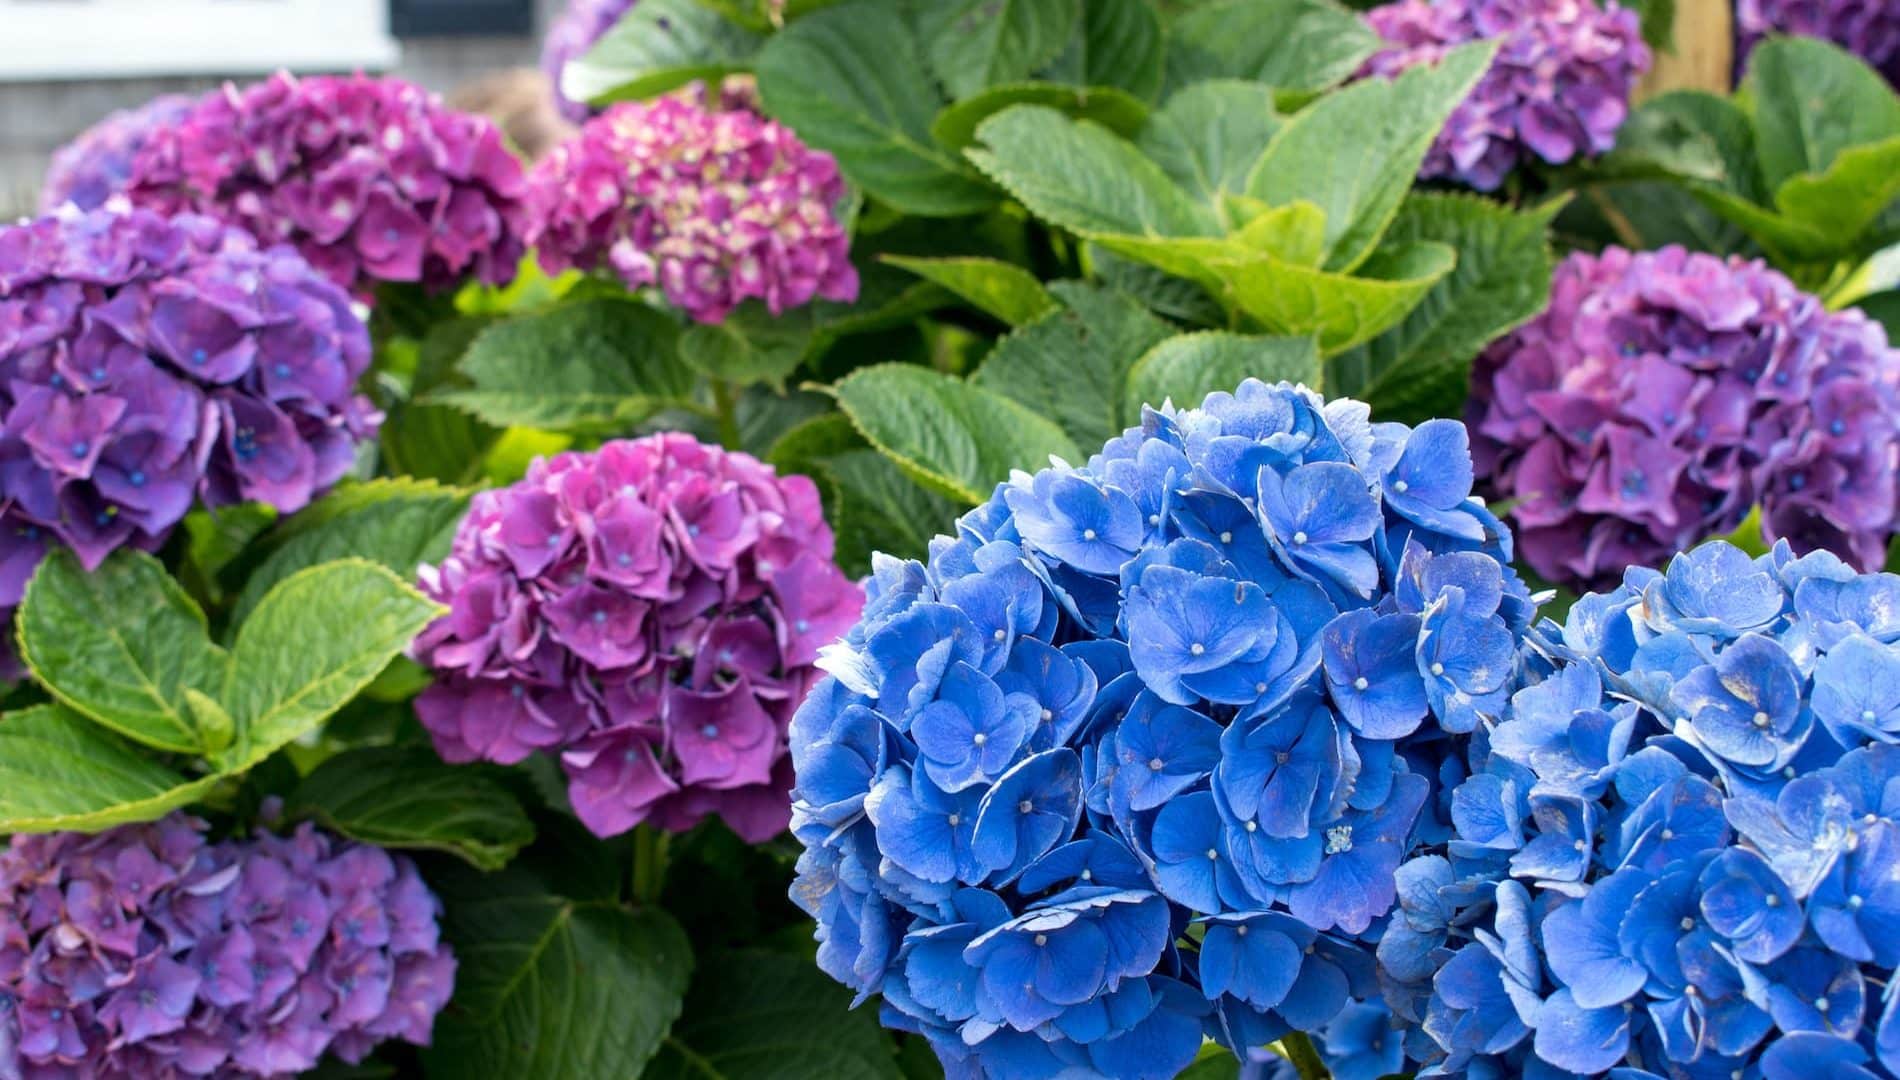 Beautiful purple and blue hydrangea blooming on Cape Cod in summertime.